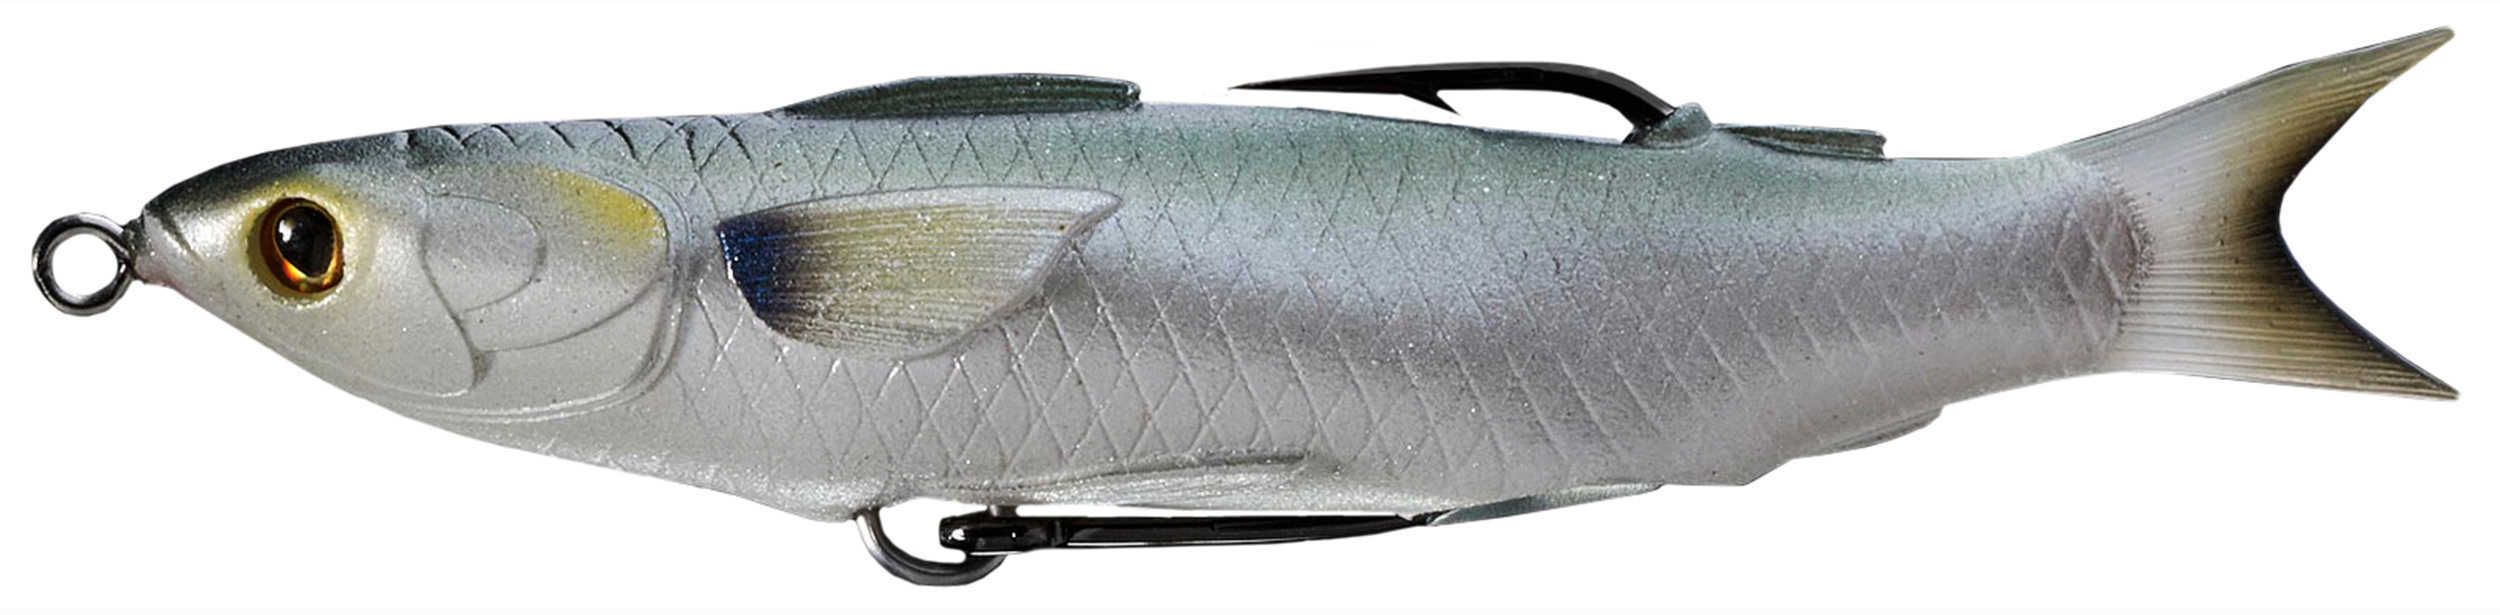 LiveTarget Lures Mullet Hollow Body Lure Saltwater, 3 3/4" Length, 3/8 oz, Surface Depth, Silver, Per 1 Md: MUH95T716